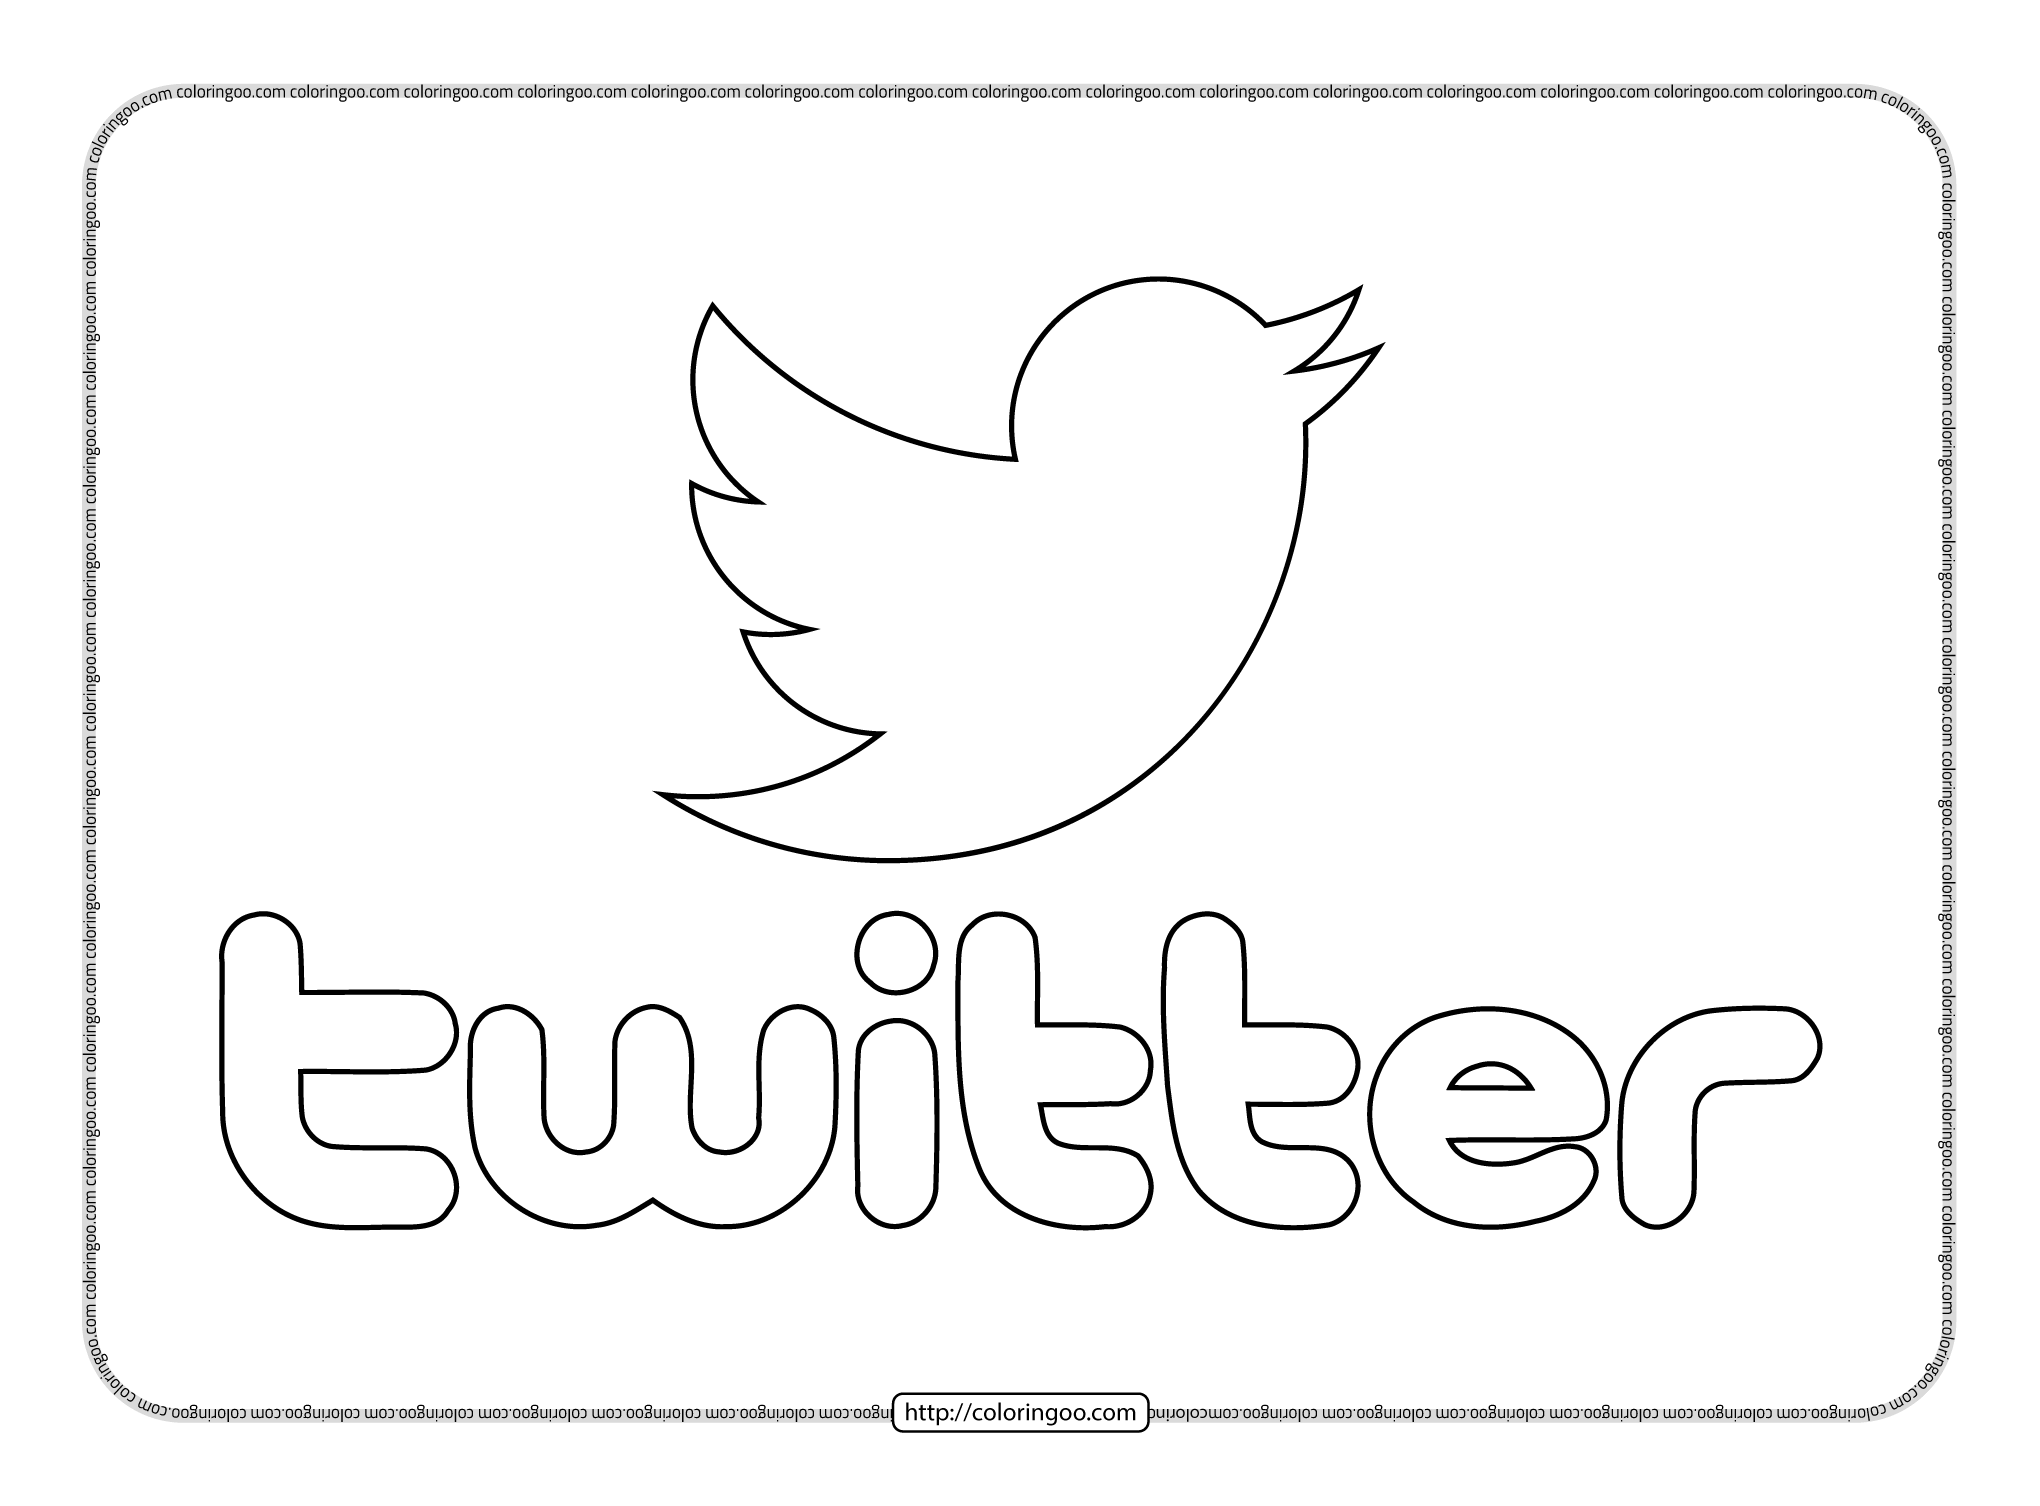 twitter logo with text pdf outline